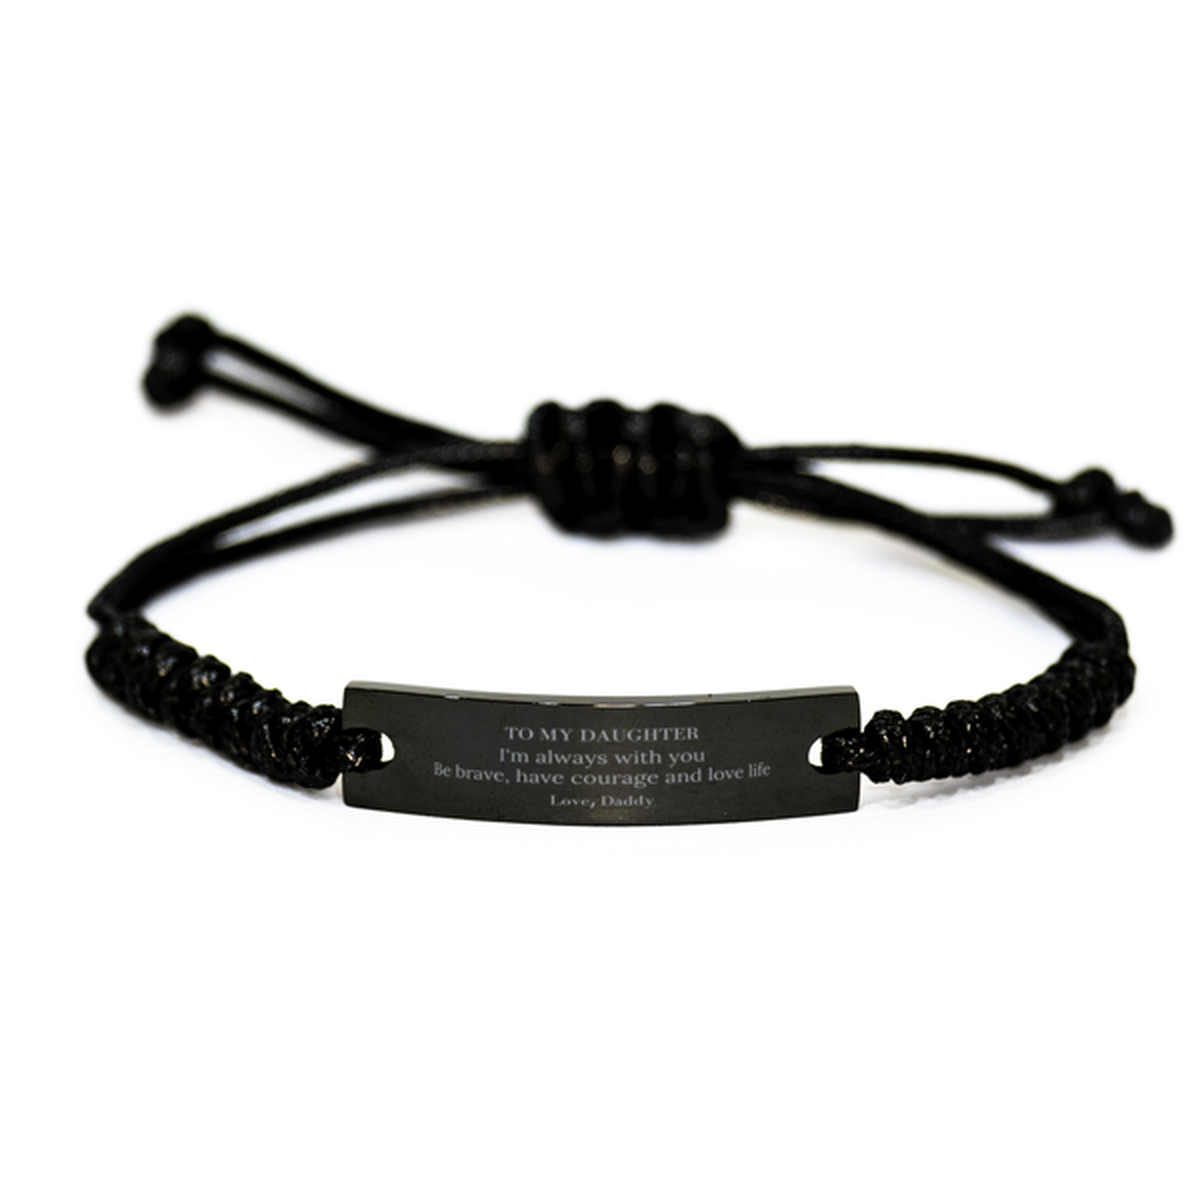 To My Daughter Gifts from Daddy, Unique Black Rope Bracelet Inspirational Christmas Birthday Graduation Gifts for Daughter I'm always with you. Be brave, have courage and love life. Love, Daddy